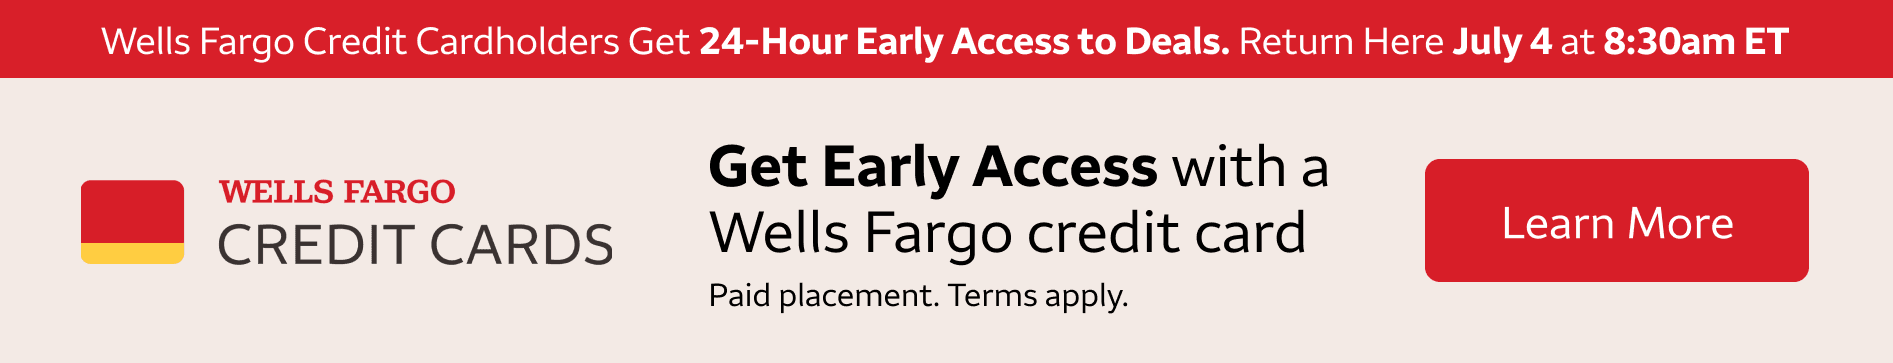 Wells Fargo credit cardholders get 24-hour early access to these deals. Return here July 4th at 8:30am eastern standard time to access these deals. To learn more about getting a Wells Fargo Credit Card, click the banner. Paid Placement. Terms apply. 